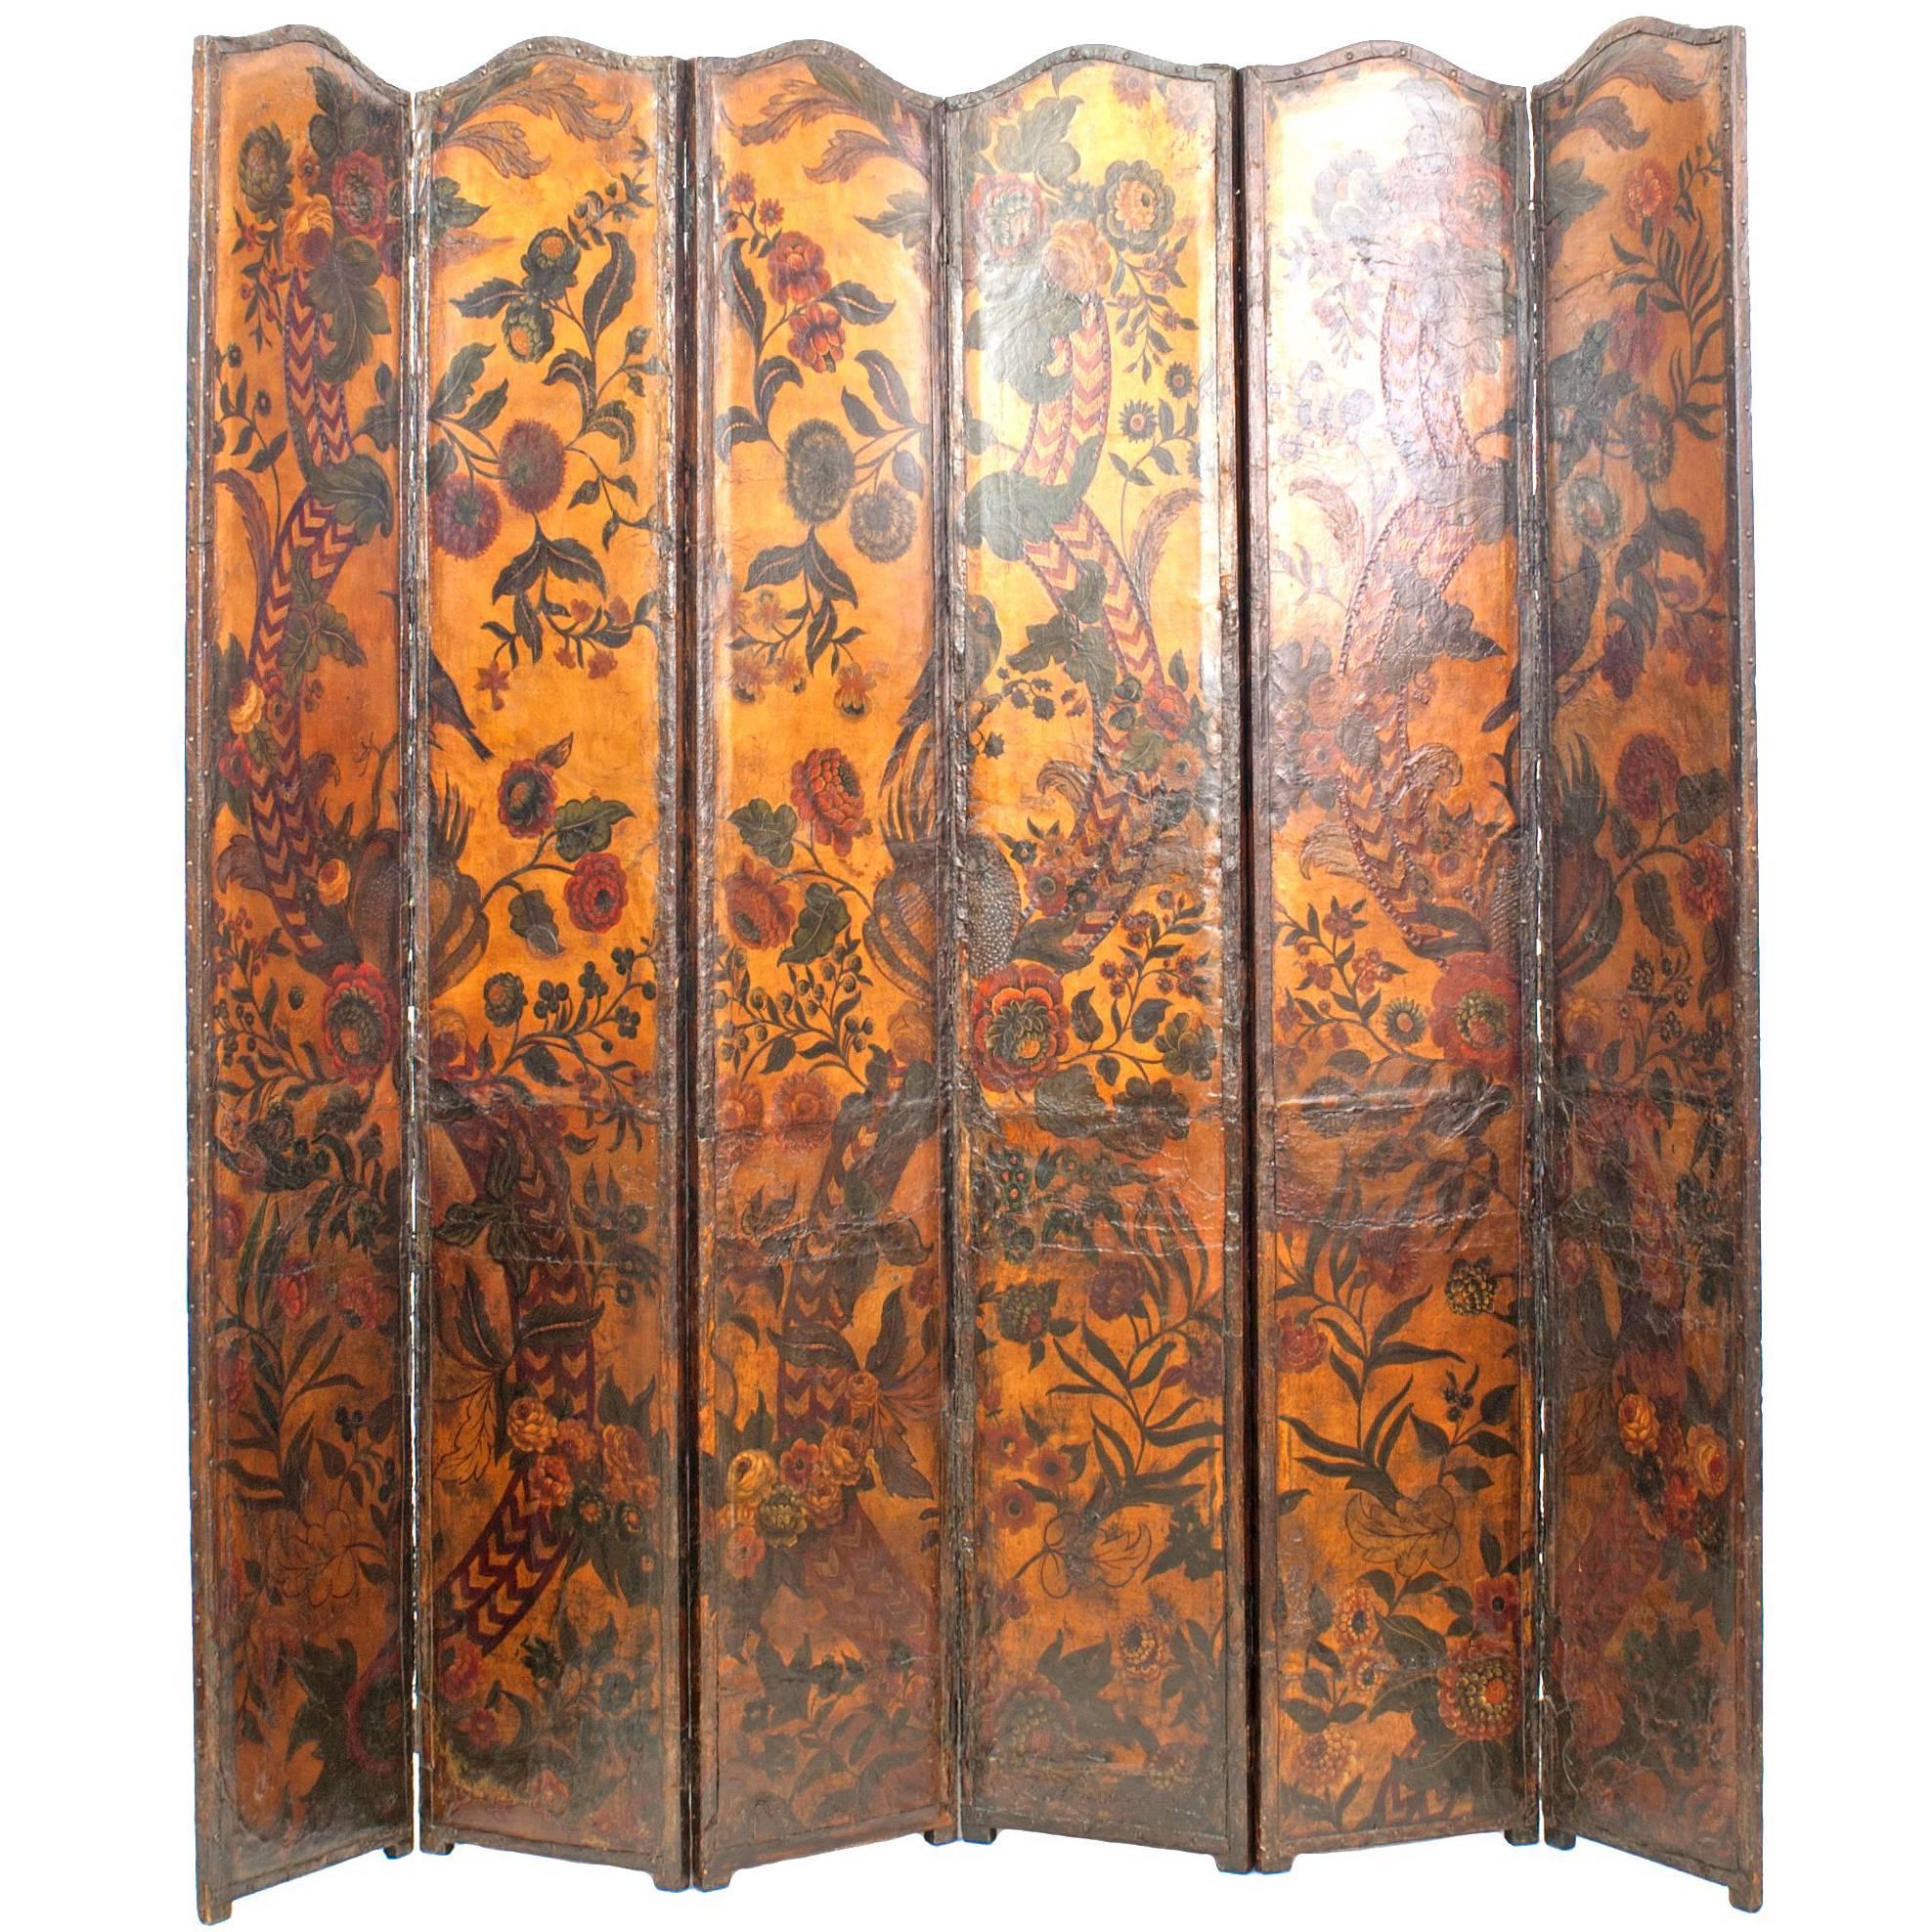 French Provincial 17th Century Renaissance Style Leather Panel Screen